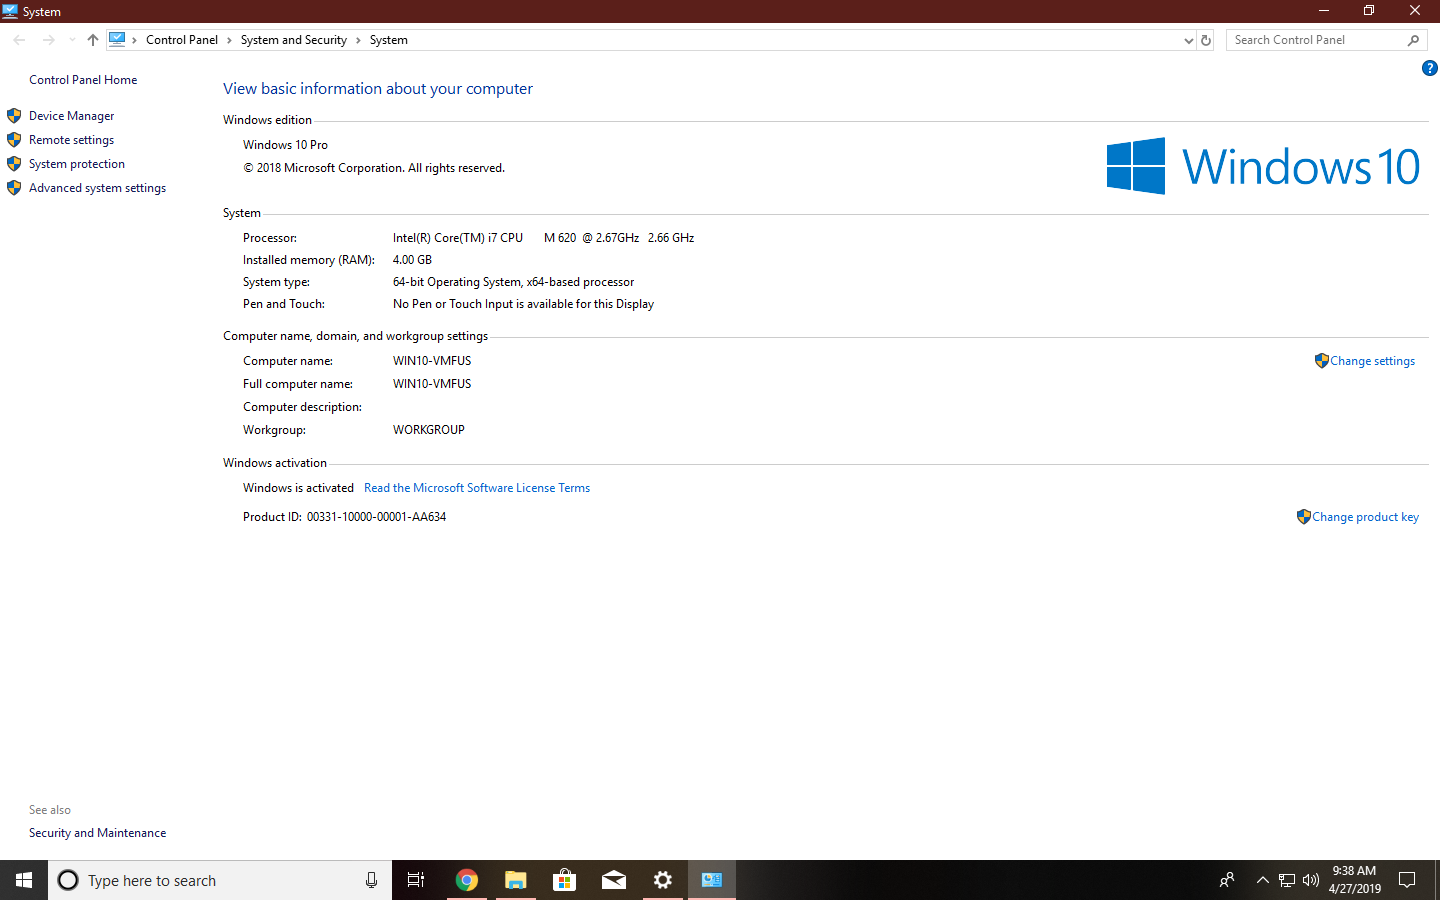 Cortana really screwed me up on that one. efa062f0-d53b-46ce-a584-e15f878a2c51?upload=true.png